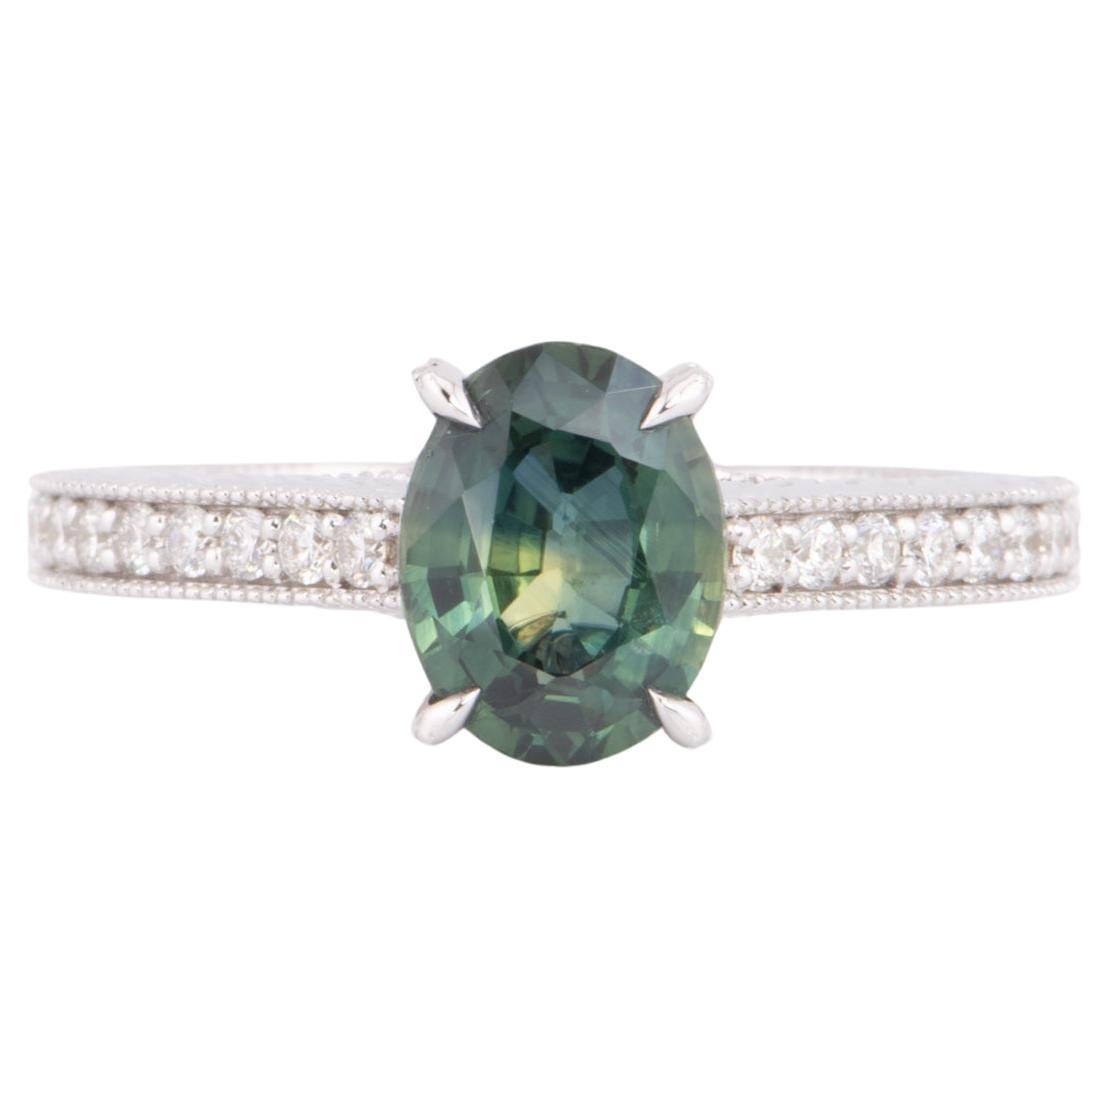 2.23ct Teal Sapphire Engagement Ring 14K White Gold with Leaf Engraving R6598 For Sale